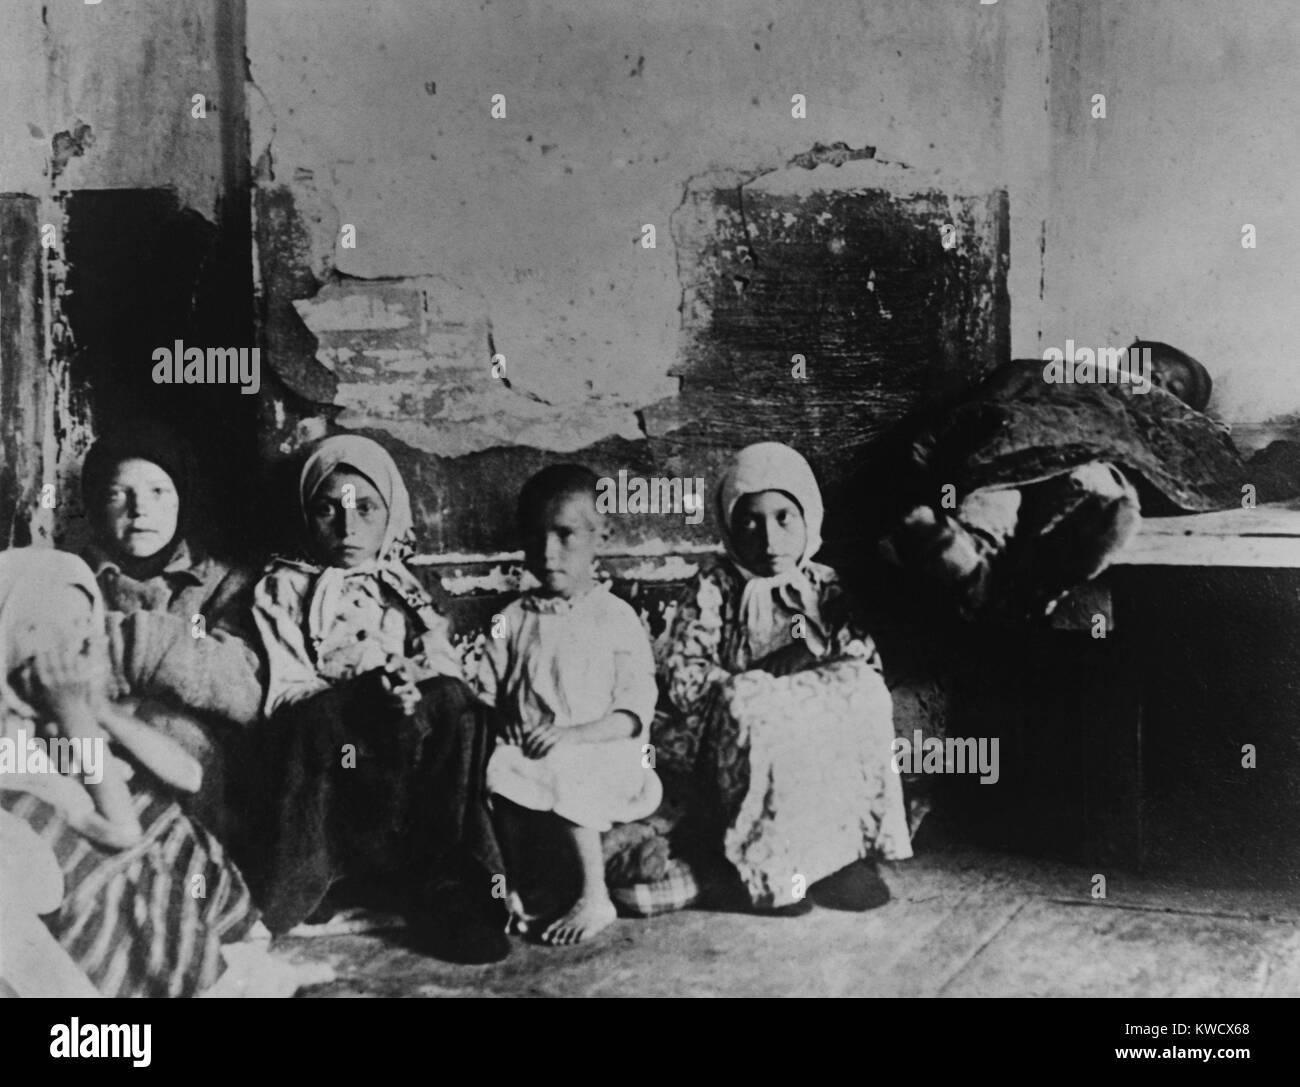 Starving children, deserted by their parents, at Samara, in the Volga District, 1921. American Relief Administration was distributing food in the region (BSLOC 2017 2 25) Stock Photo